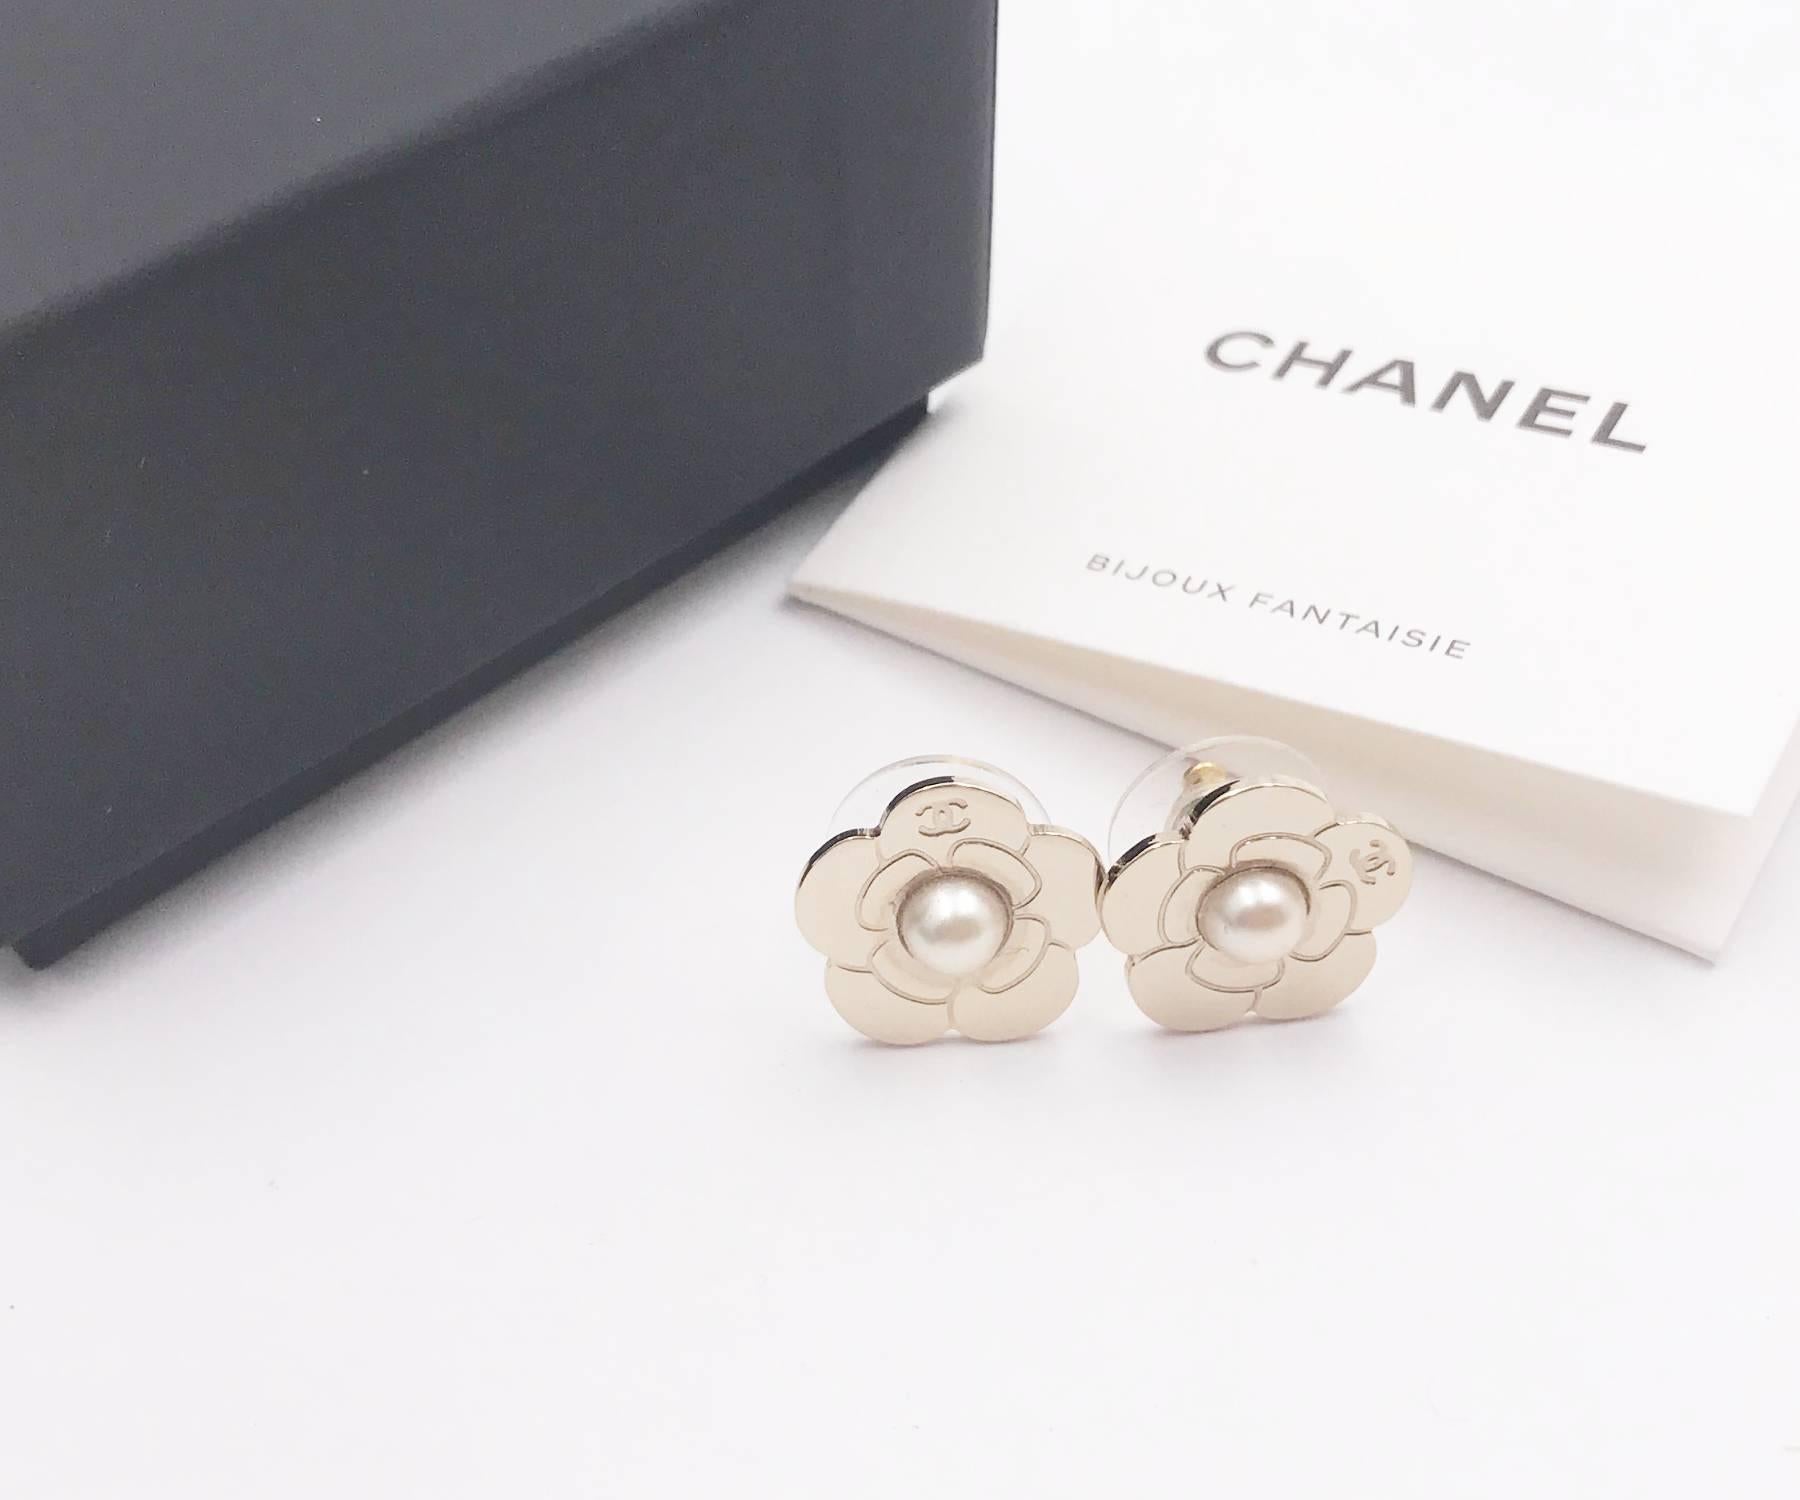 Chanel Gold Embossed Camellia Pearl Piercing Earrings

*Marked 17
*Made in Italy
*Comes with the original box

-Approximately 0.6″ x 0.6″
-In an excellent condition

2117-46482